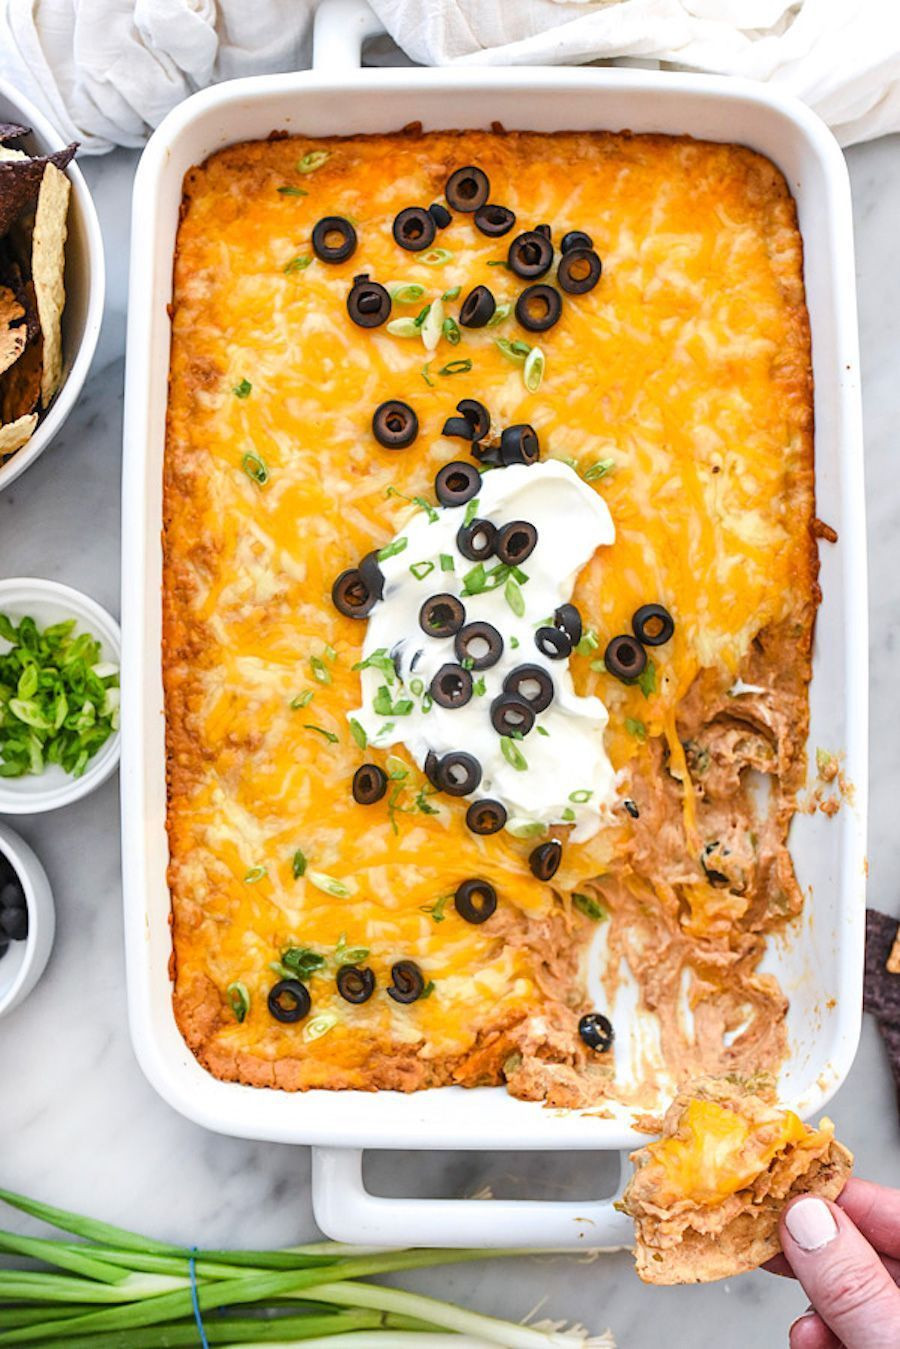 Kid Friendly Super Bowl Recipes
 16 Super Bowl Recipes for the Whole Family